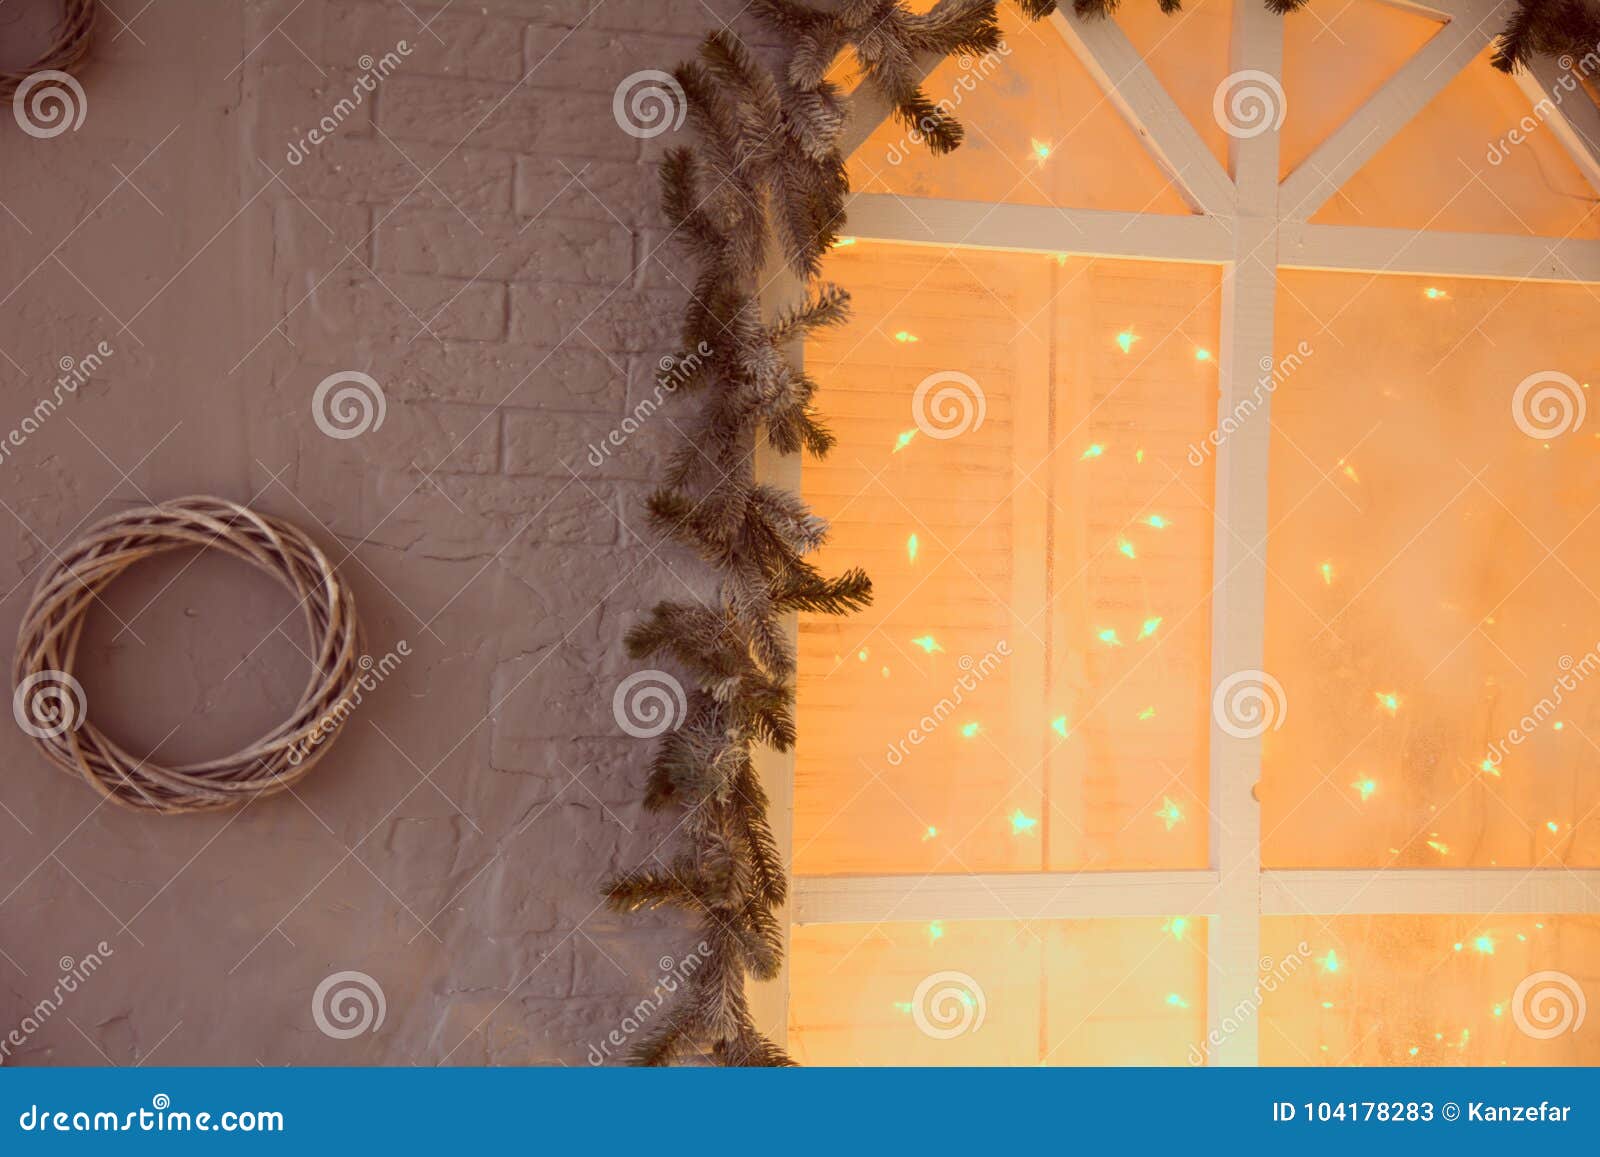 Spruce Branches With Illuminated Garlands Window. Stock Image - Image